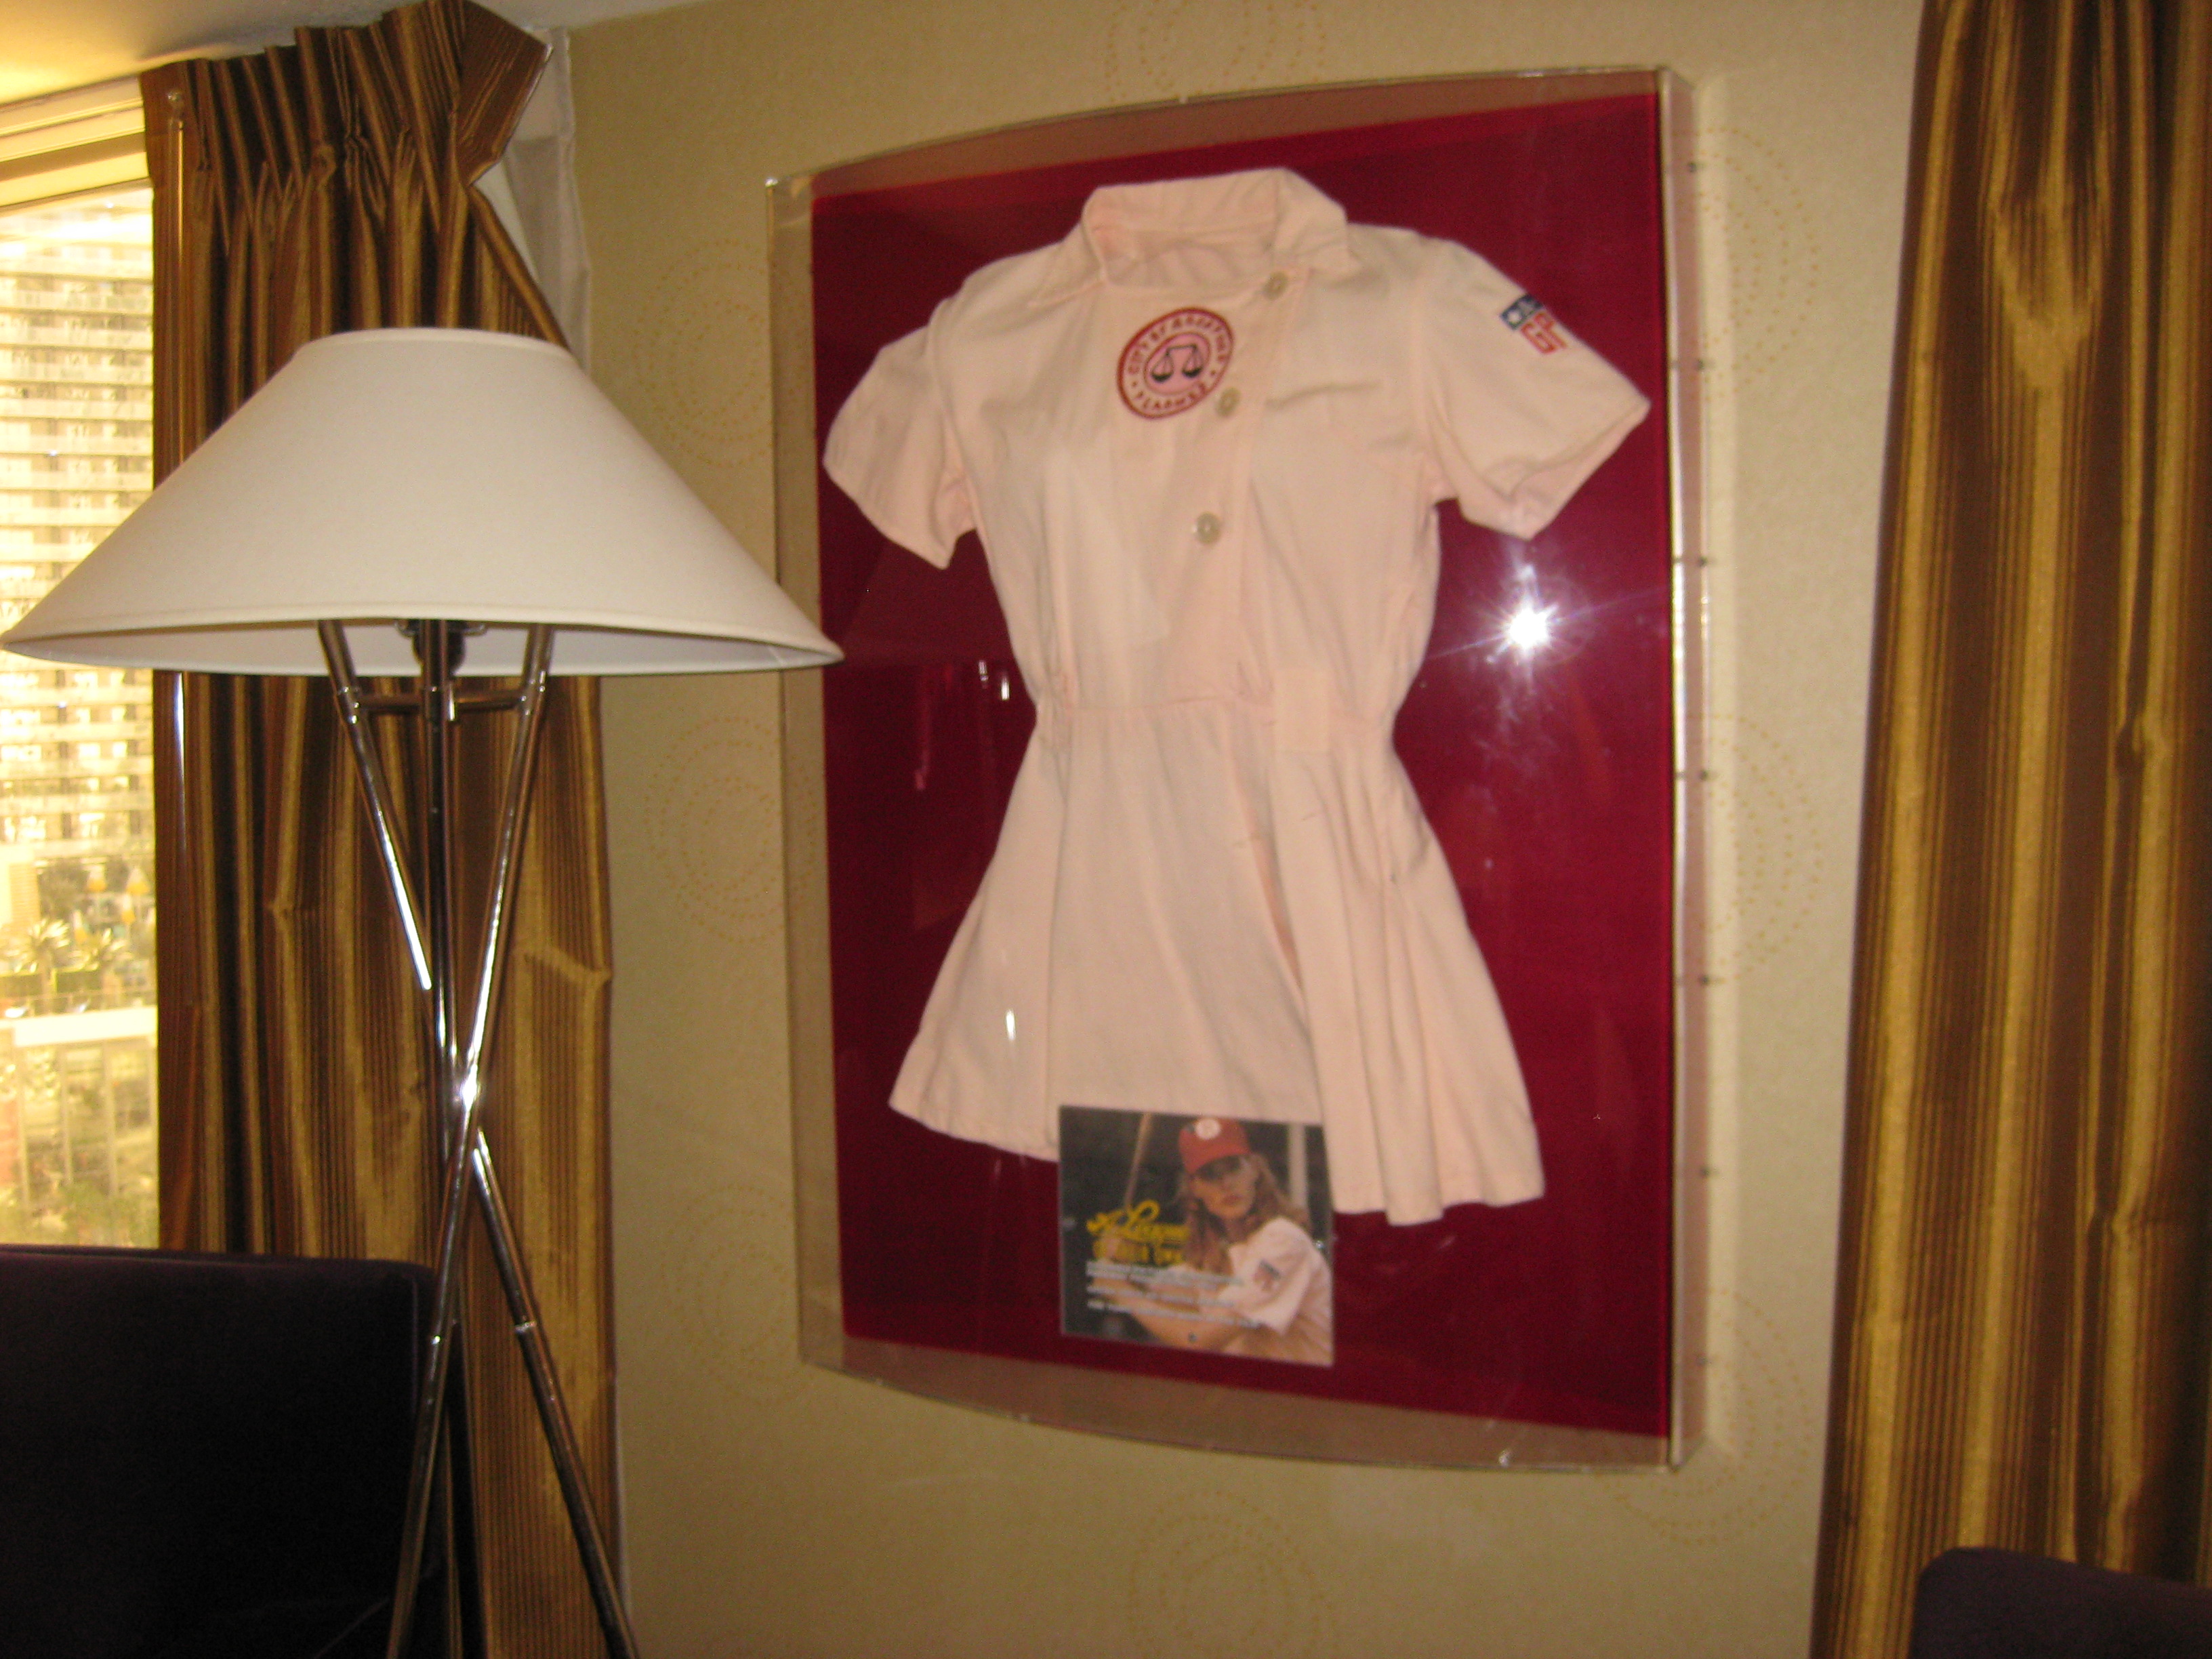 A different uniform in this room, that of the Rockford Peaches